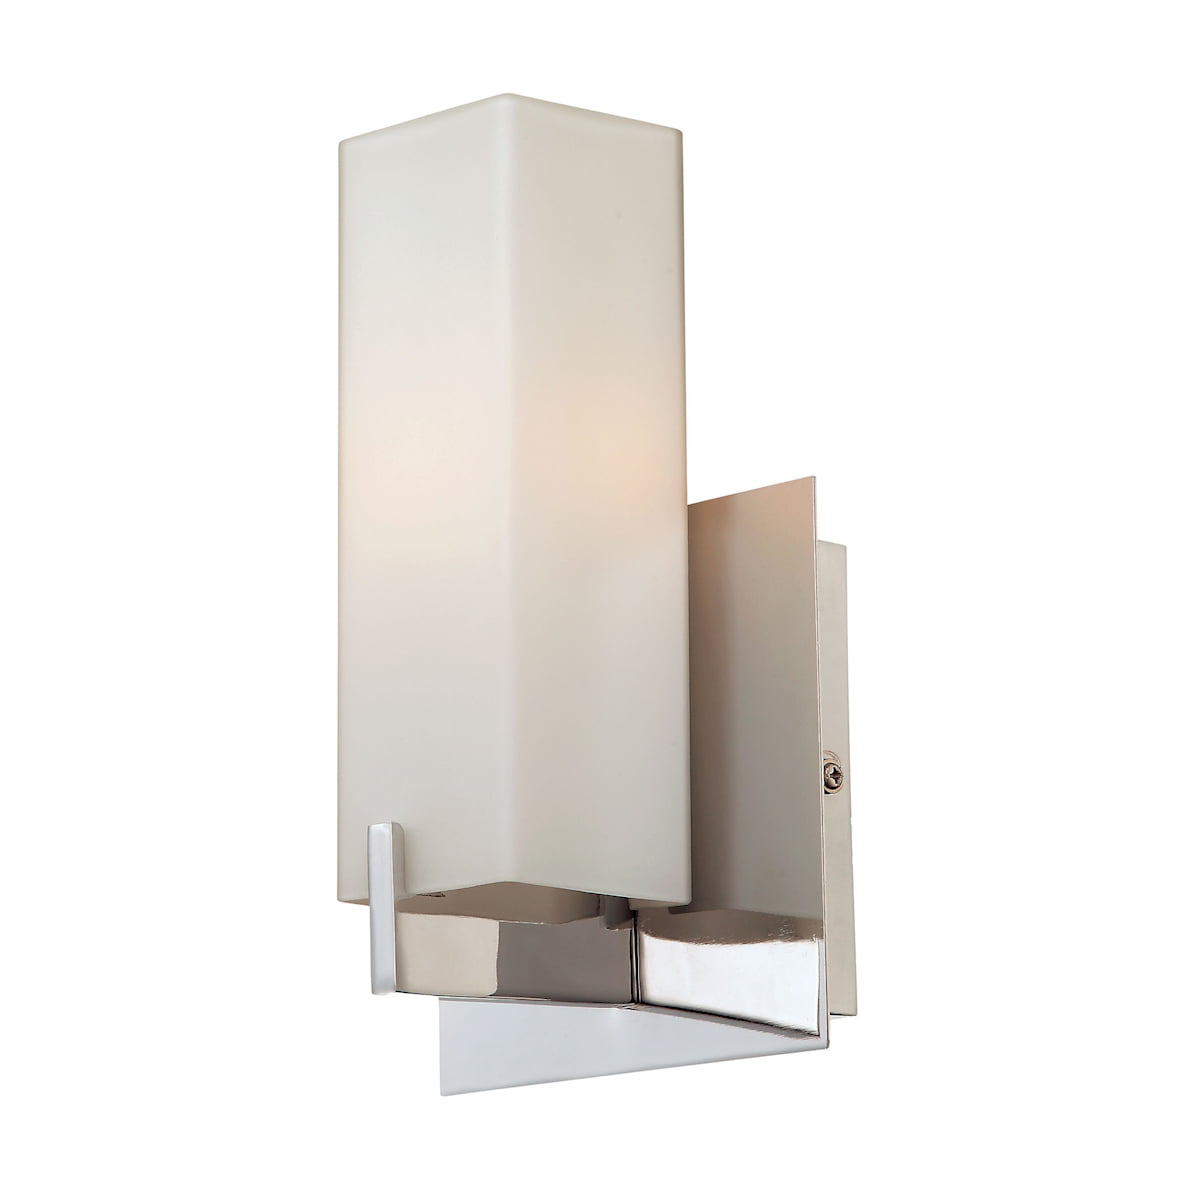 Inspired IL-D0238 Cooper Single Wall Light Satin Nickel/Opal White Finish 